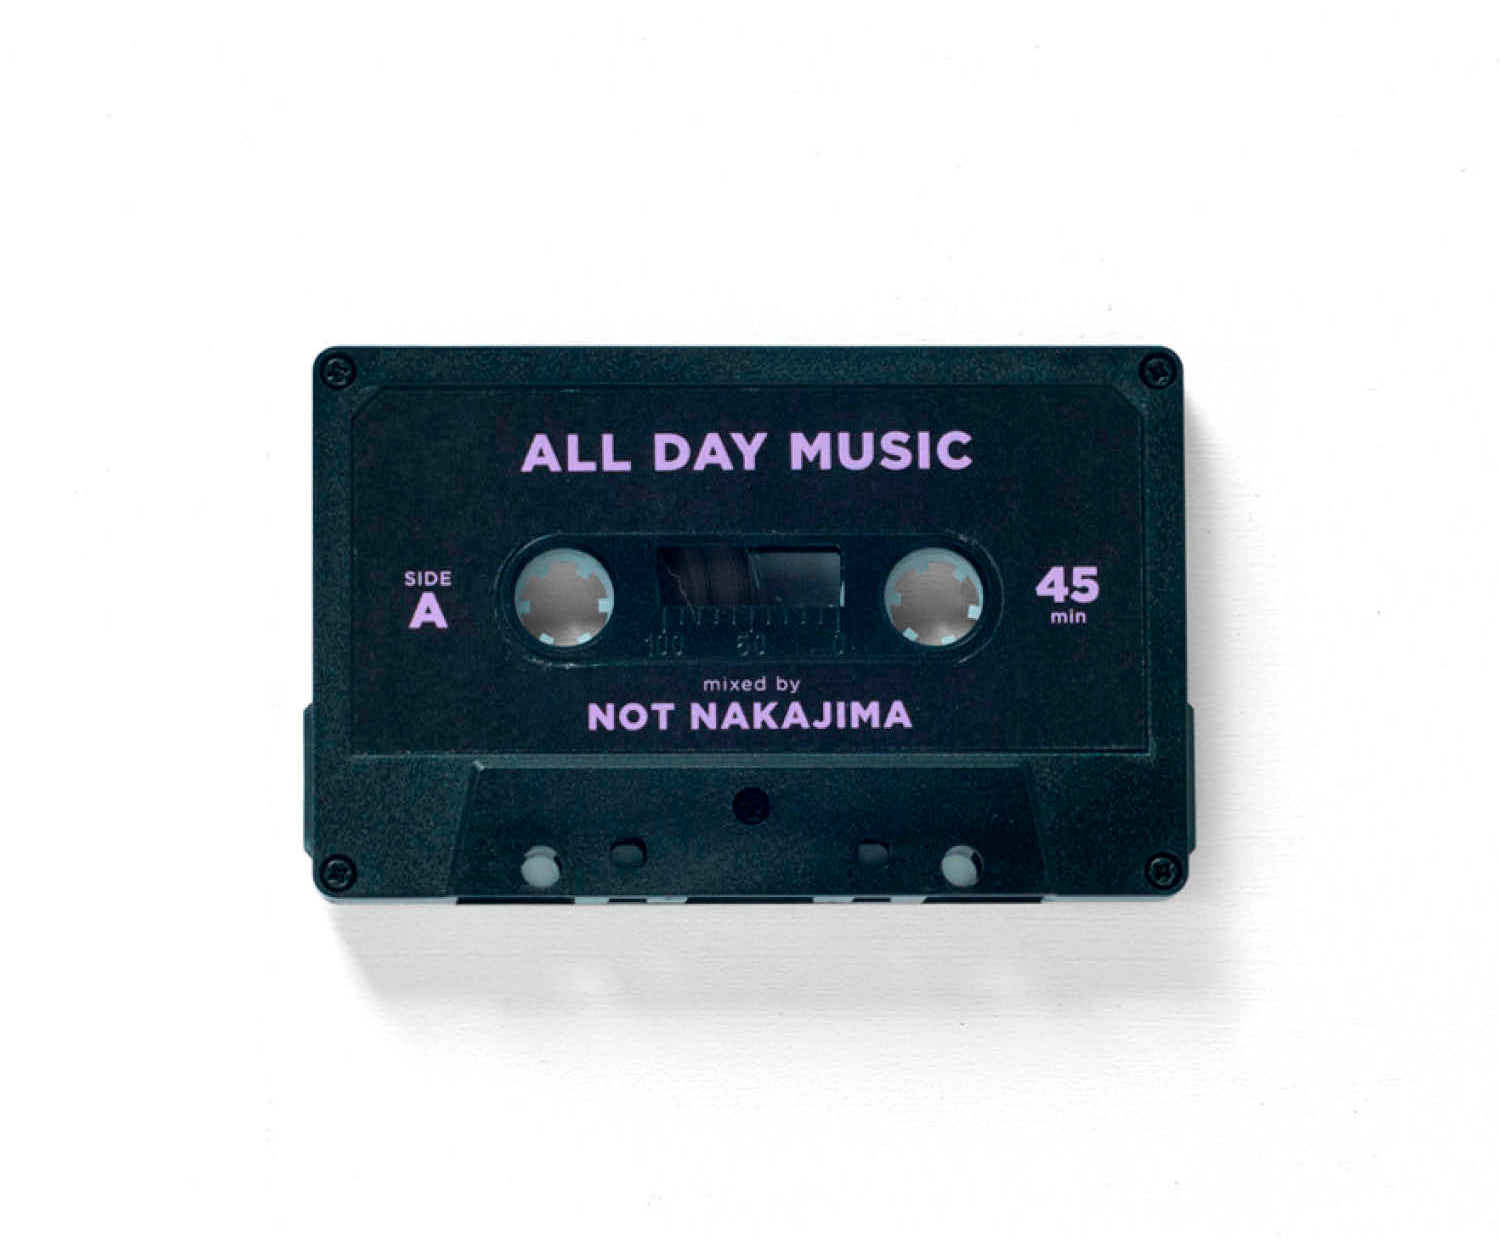 A.D.M. #2 - Mixed by NOT NAKAJIMA | LIKE THIS SHOP